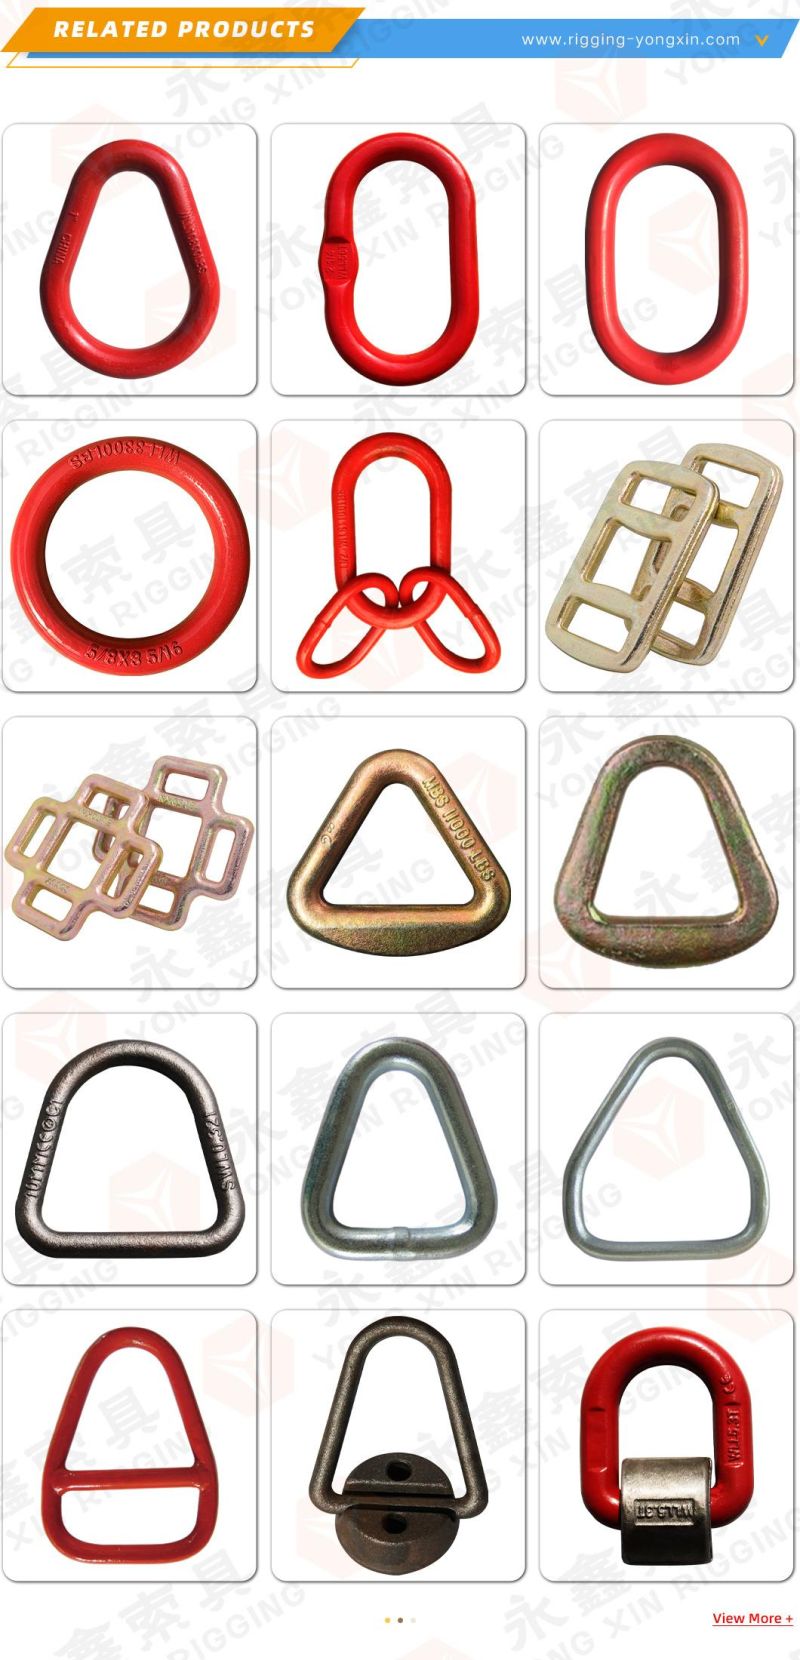 35mm Forged One Way Buckle Galvanized One Way Buckle Metal Frame Lashing Buckle